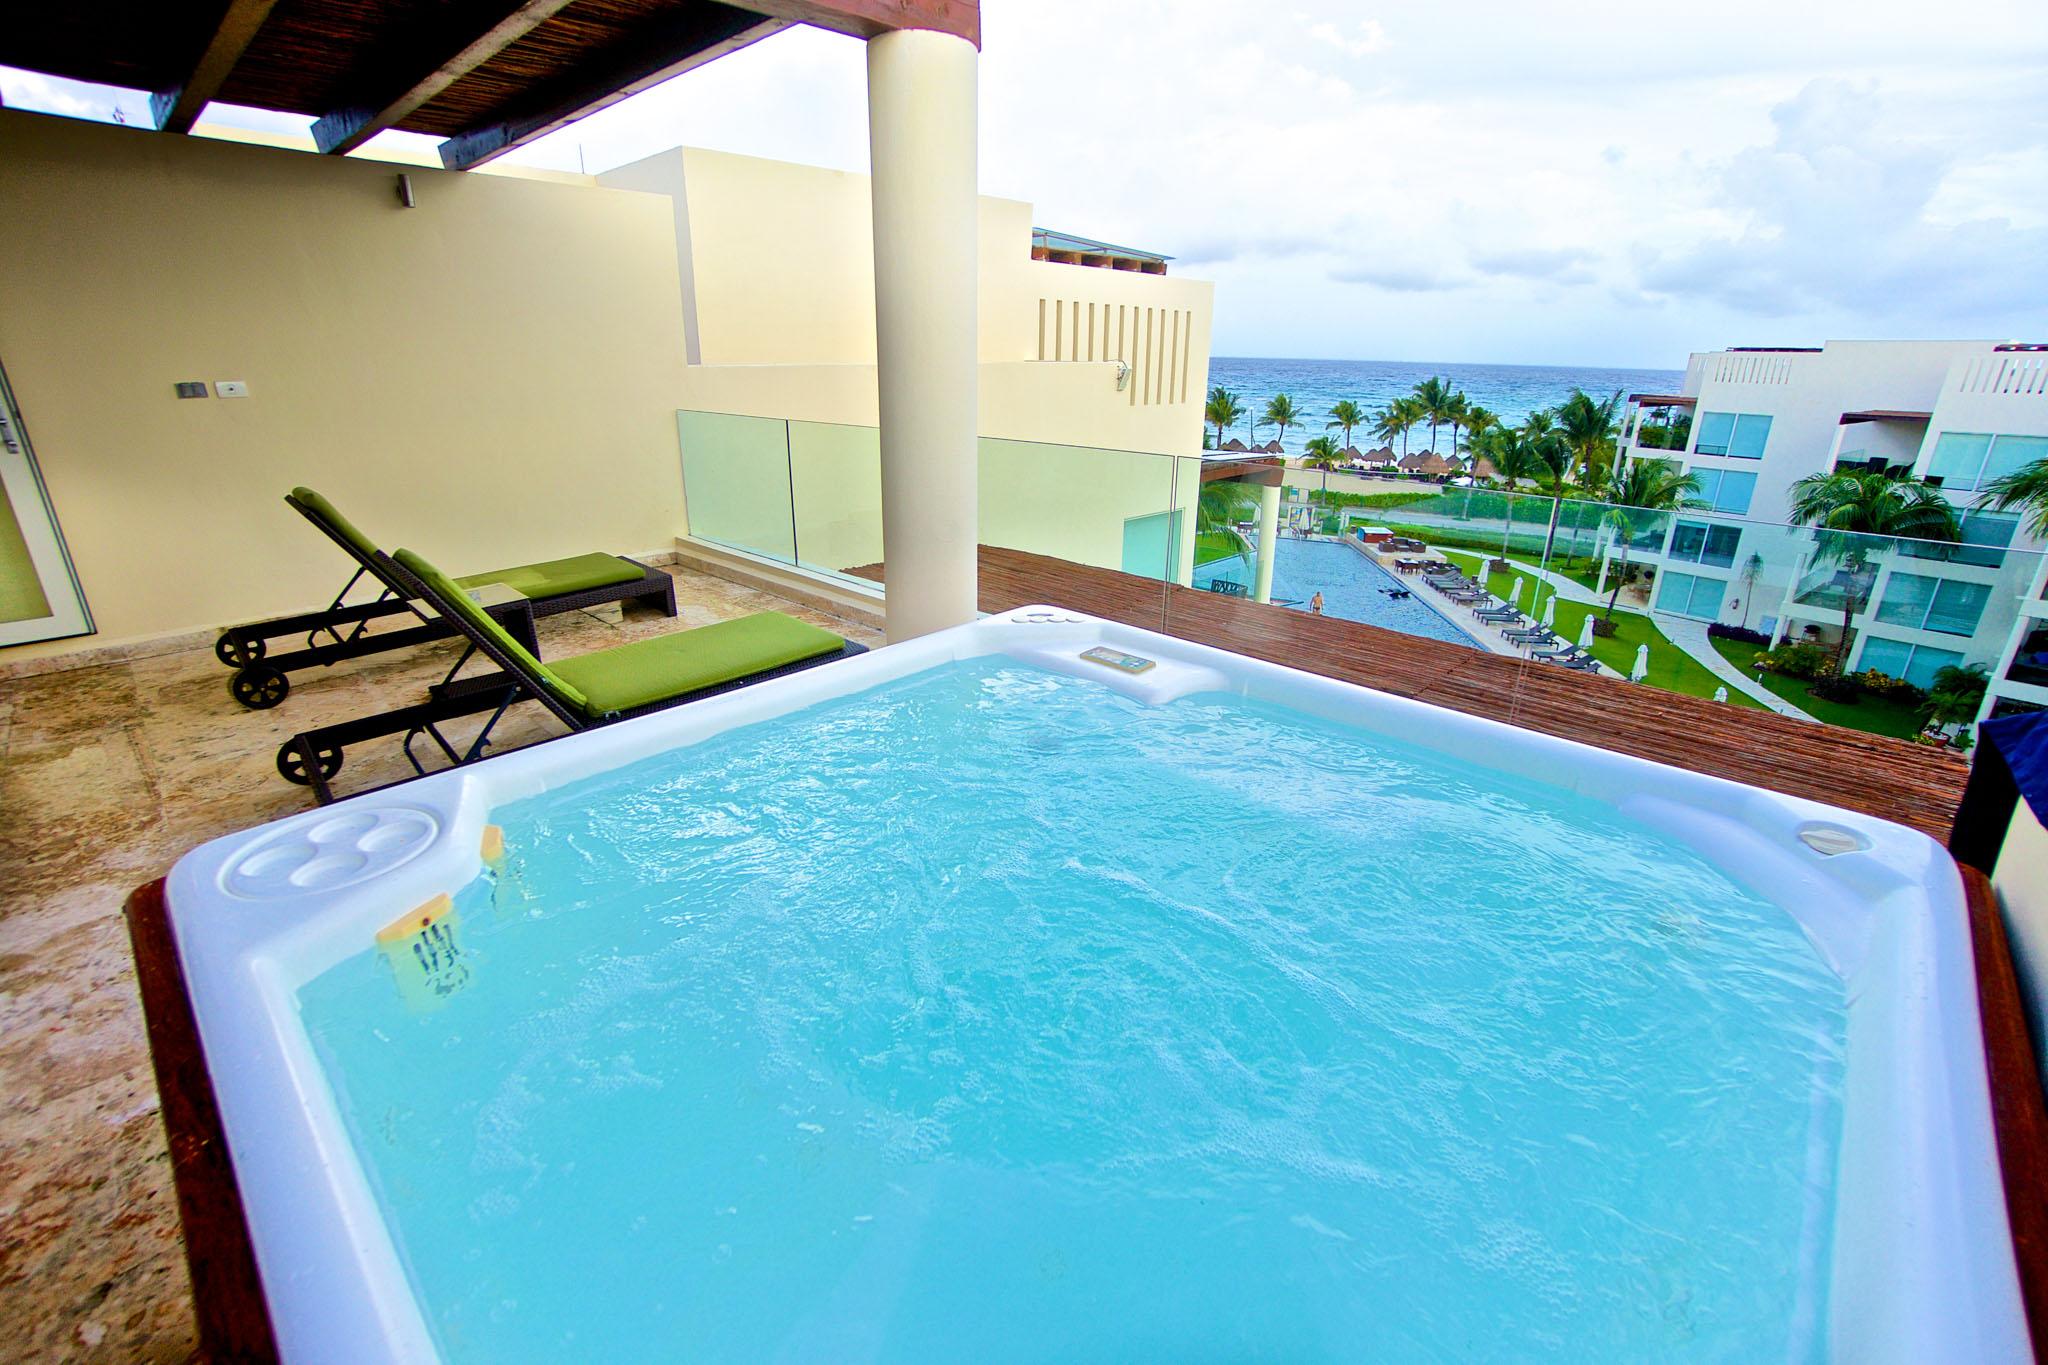 Property Image 2 - Distinguished 3 Bedroom Home with Roof Top Hot Tub and Ocean Views